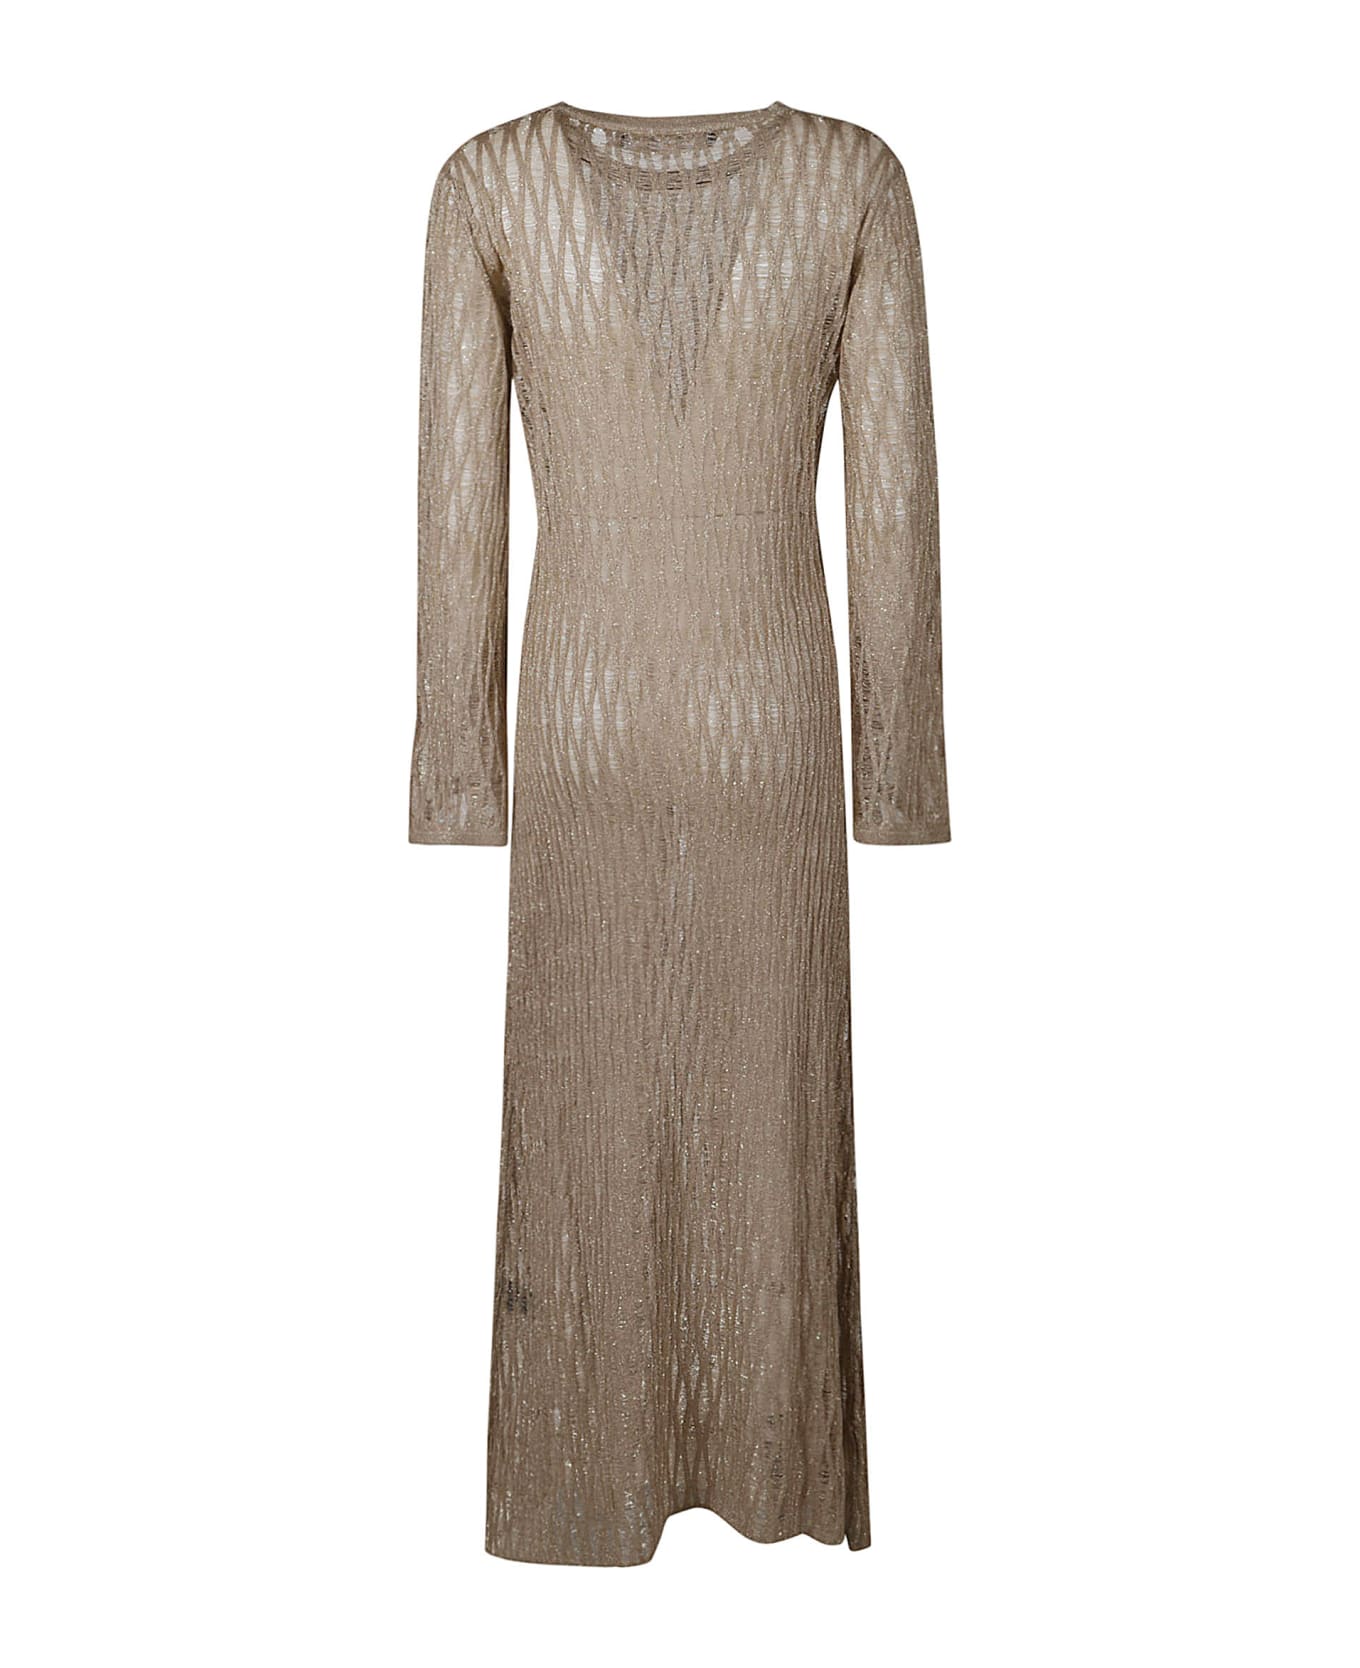 Federica Tosi See Through Long-sleeved Dress - Gold